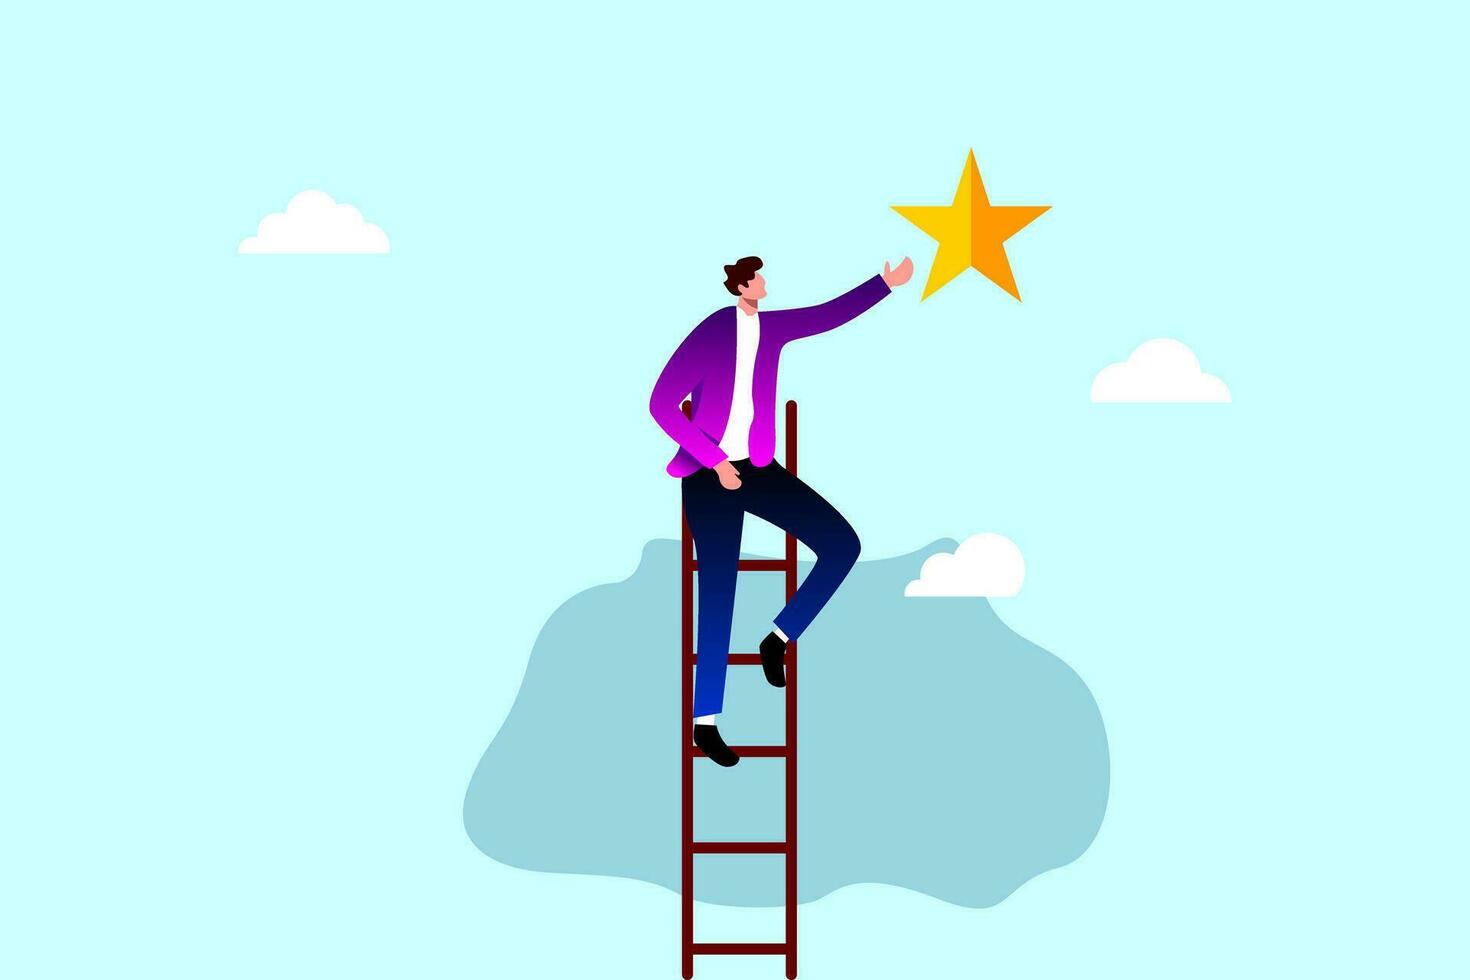 businessman climbing up stairs to success, accomplishment or career development concept, Success ladder to reach goal, achievement or opportunity vector